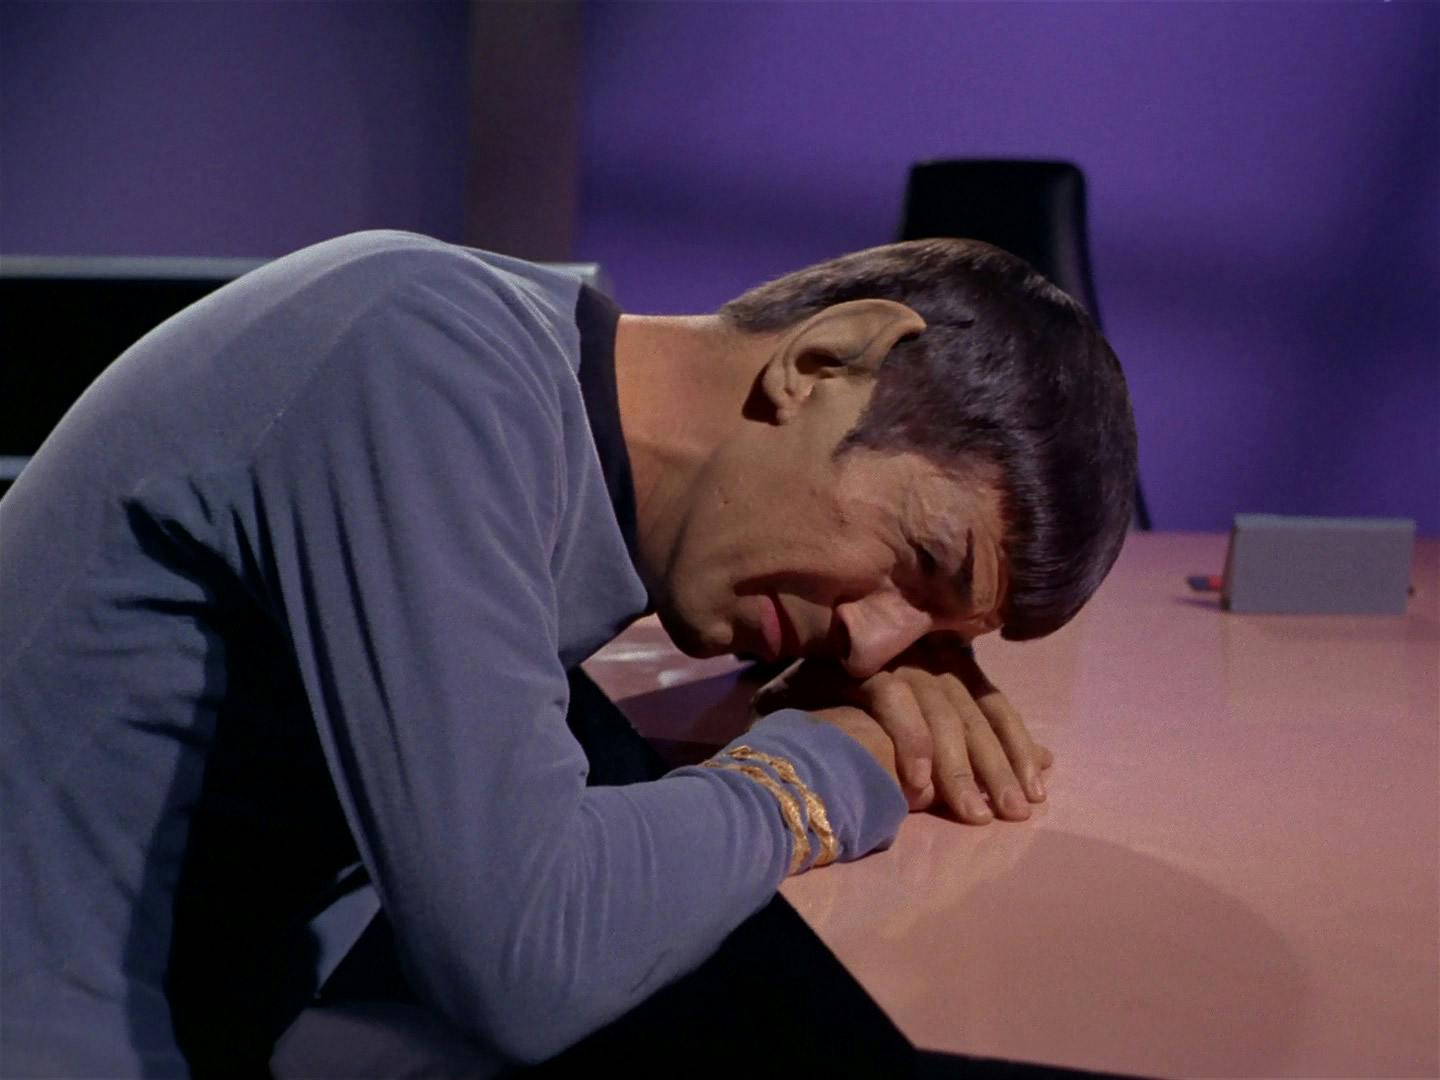 Spock fought his overwhelming feelings but while infected with a contagion, he succumbs to his emotions, resting his head on his hands at the table in 'The Naked Time'